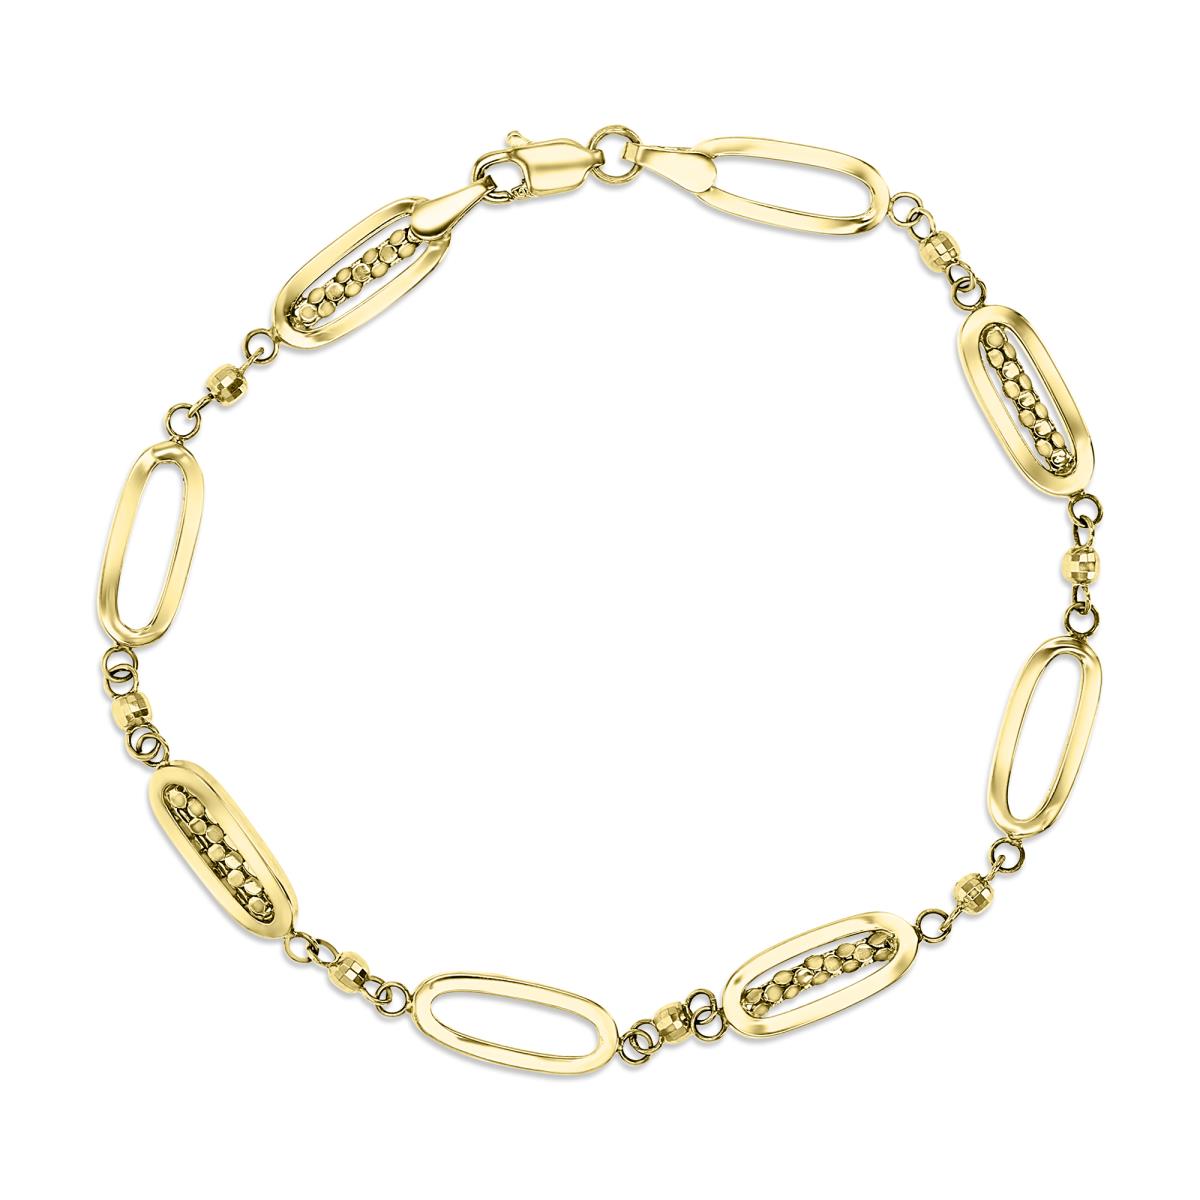 10K Yellow Gold 5mm Polished Bead & Paperclip 7.5" Bracelet